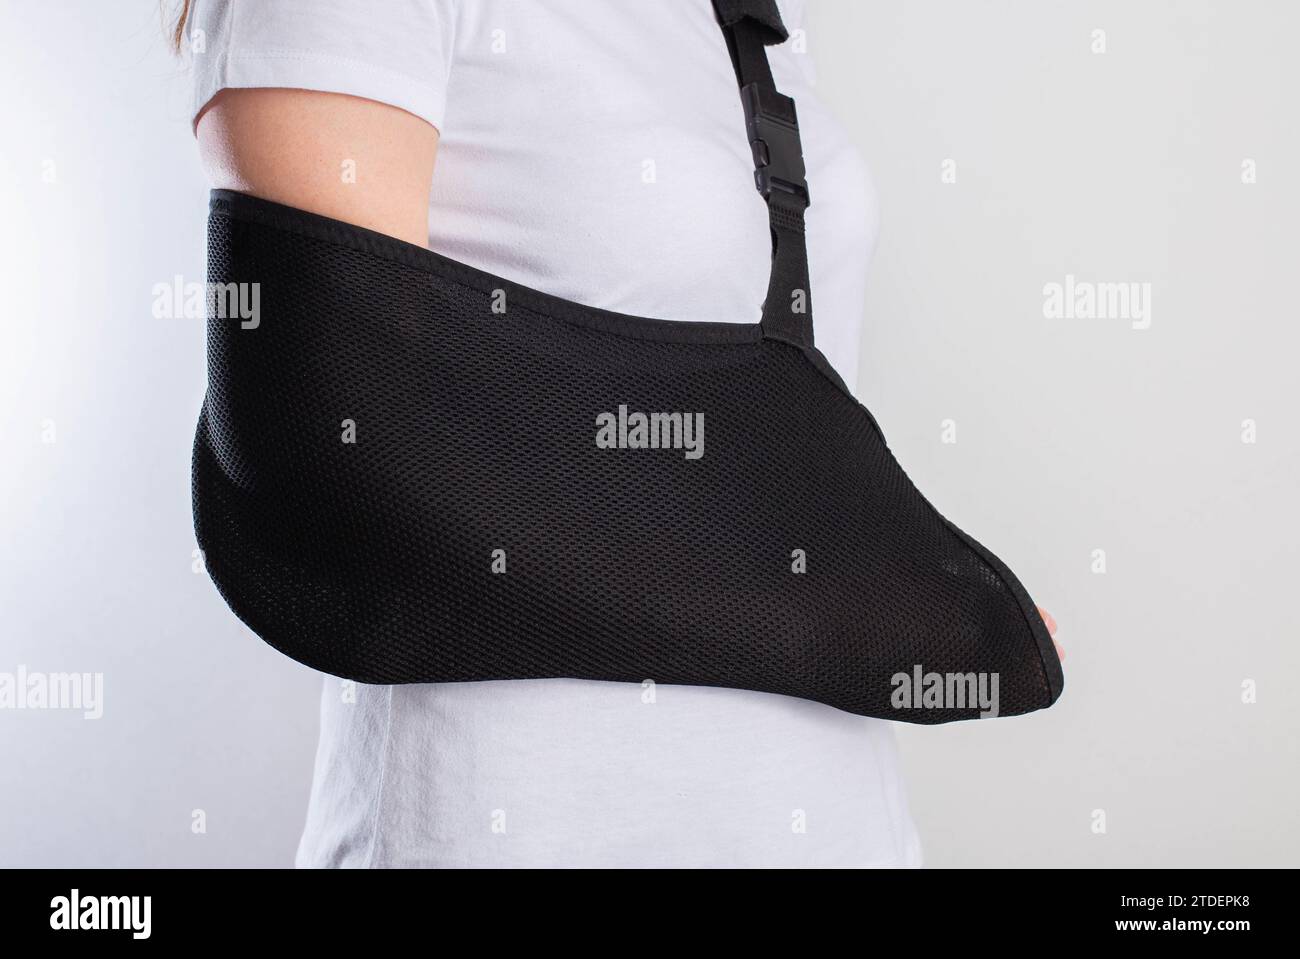 A girl's arm in a black support bandage after a broken arm and sprained shoulder joint. Rehabilitation after injury Stock Photo